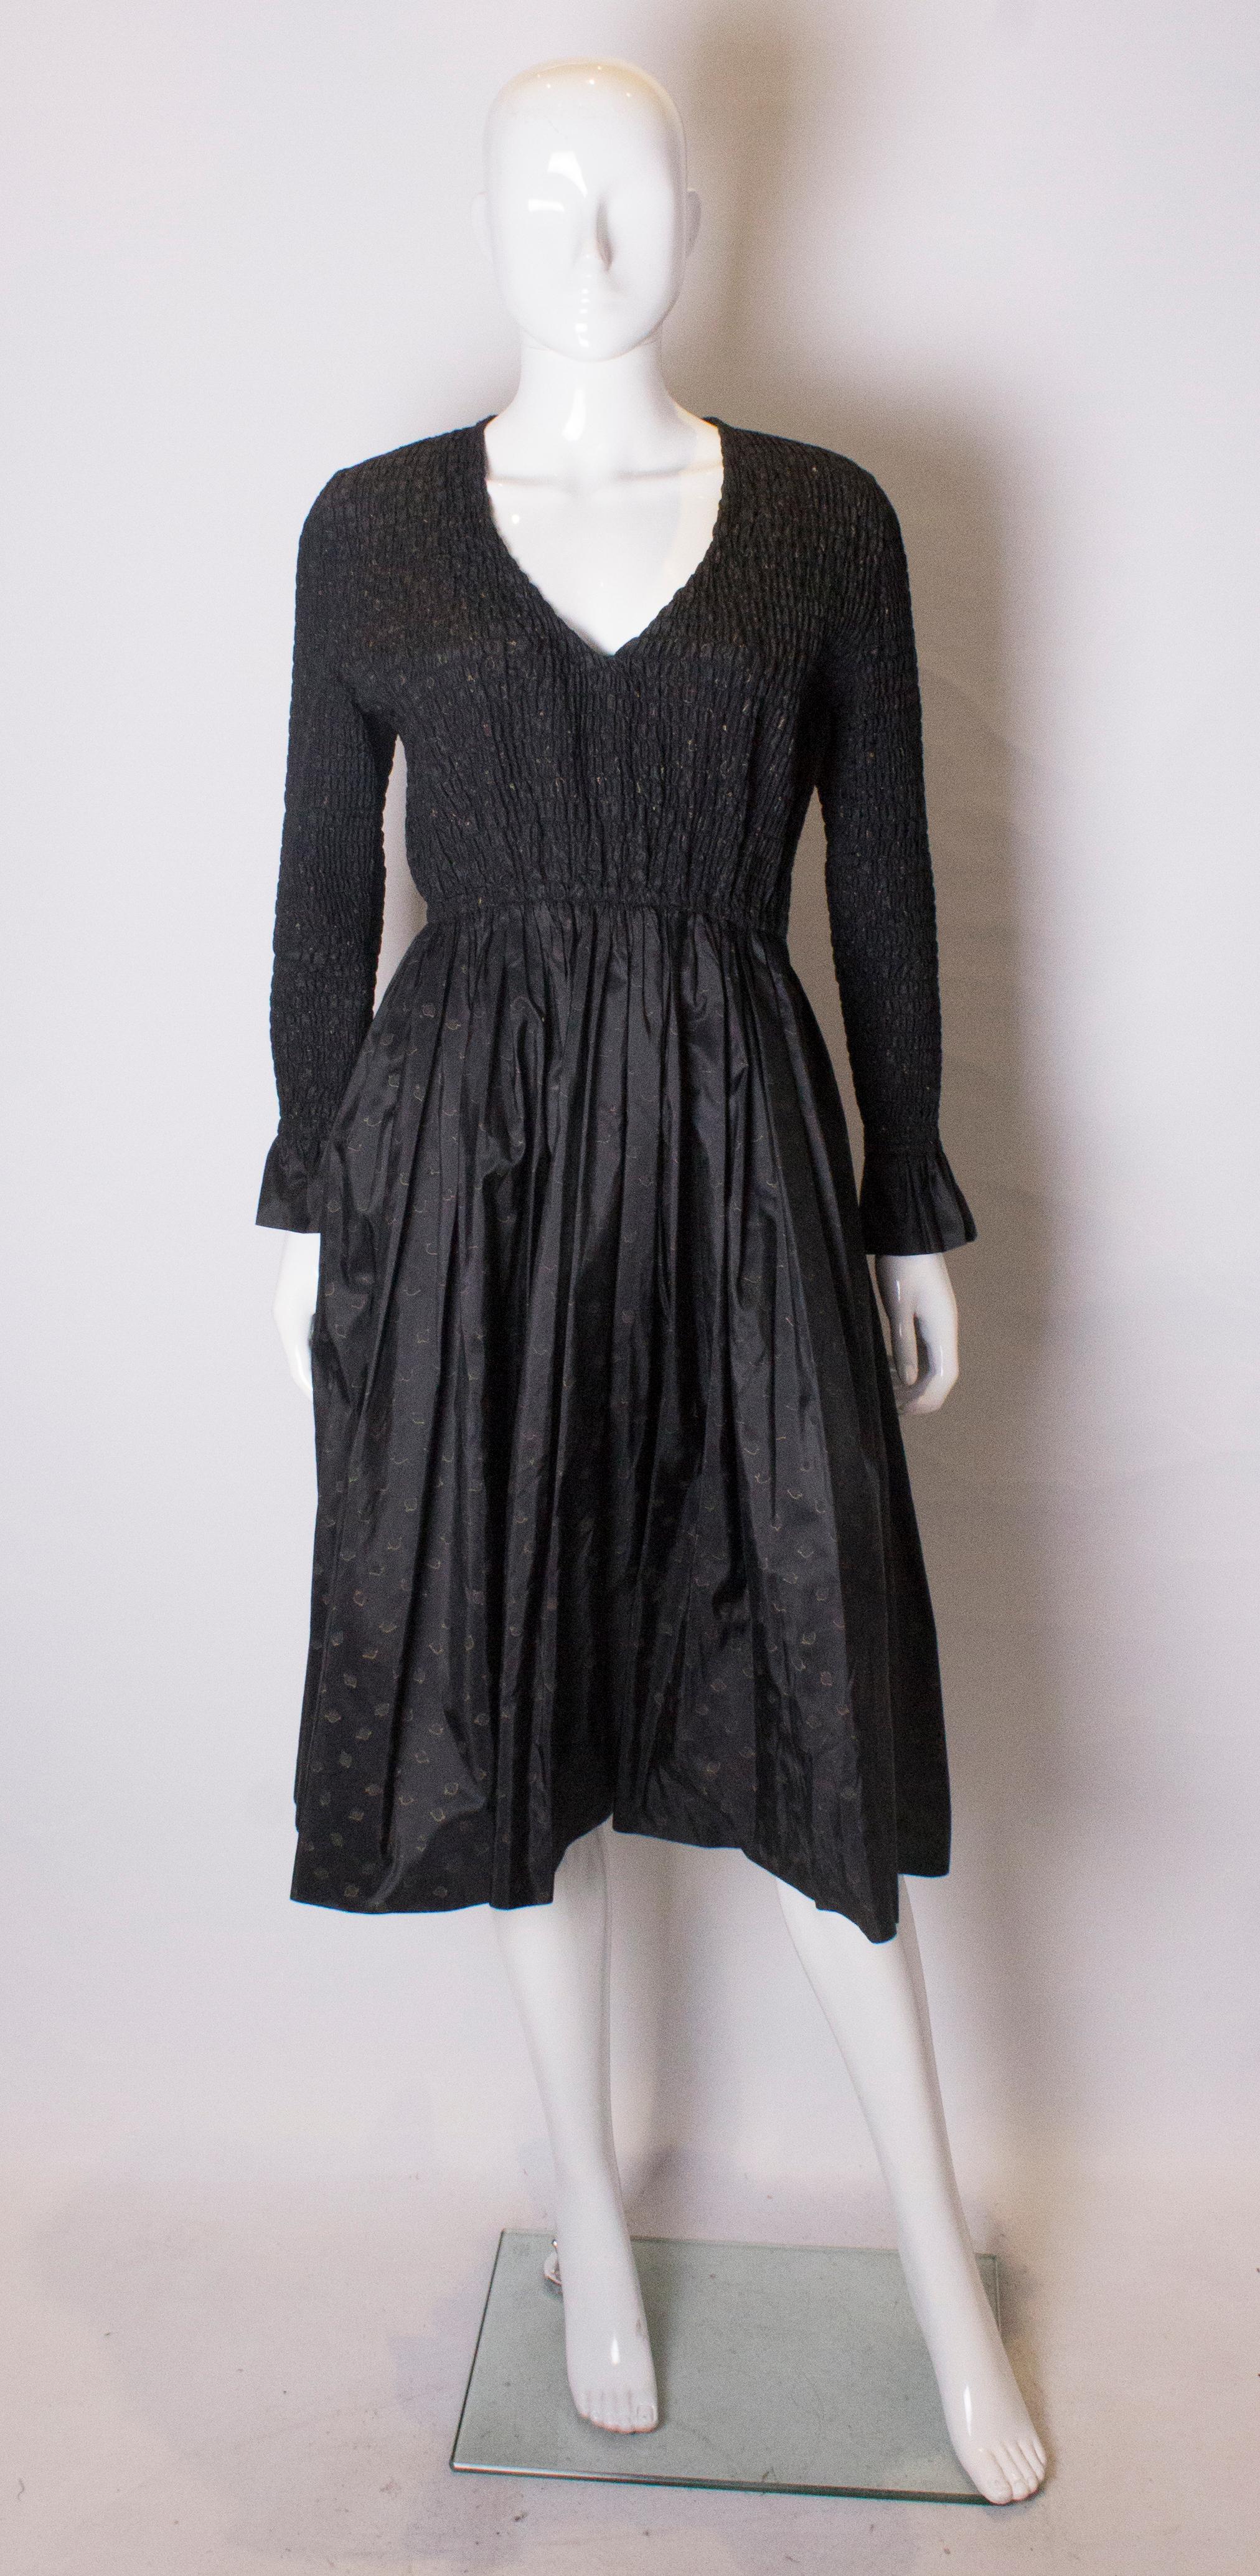 A chic vintage silk dress by Bruce Oldfield.  The dress has a gathered bodice is rooching and a v neckline. The skirt has an attractive spade design, and it has a side zip opening.